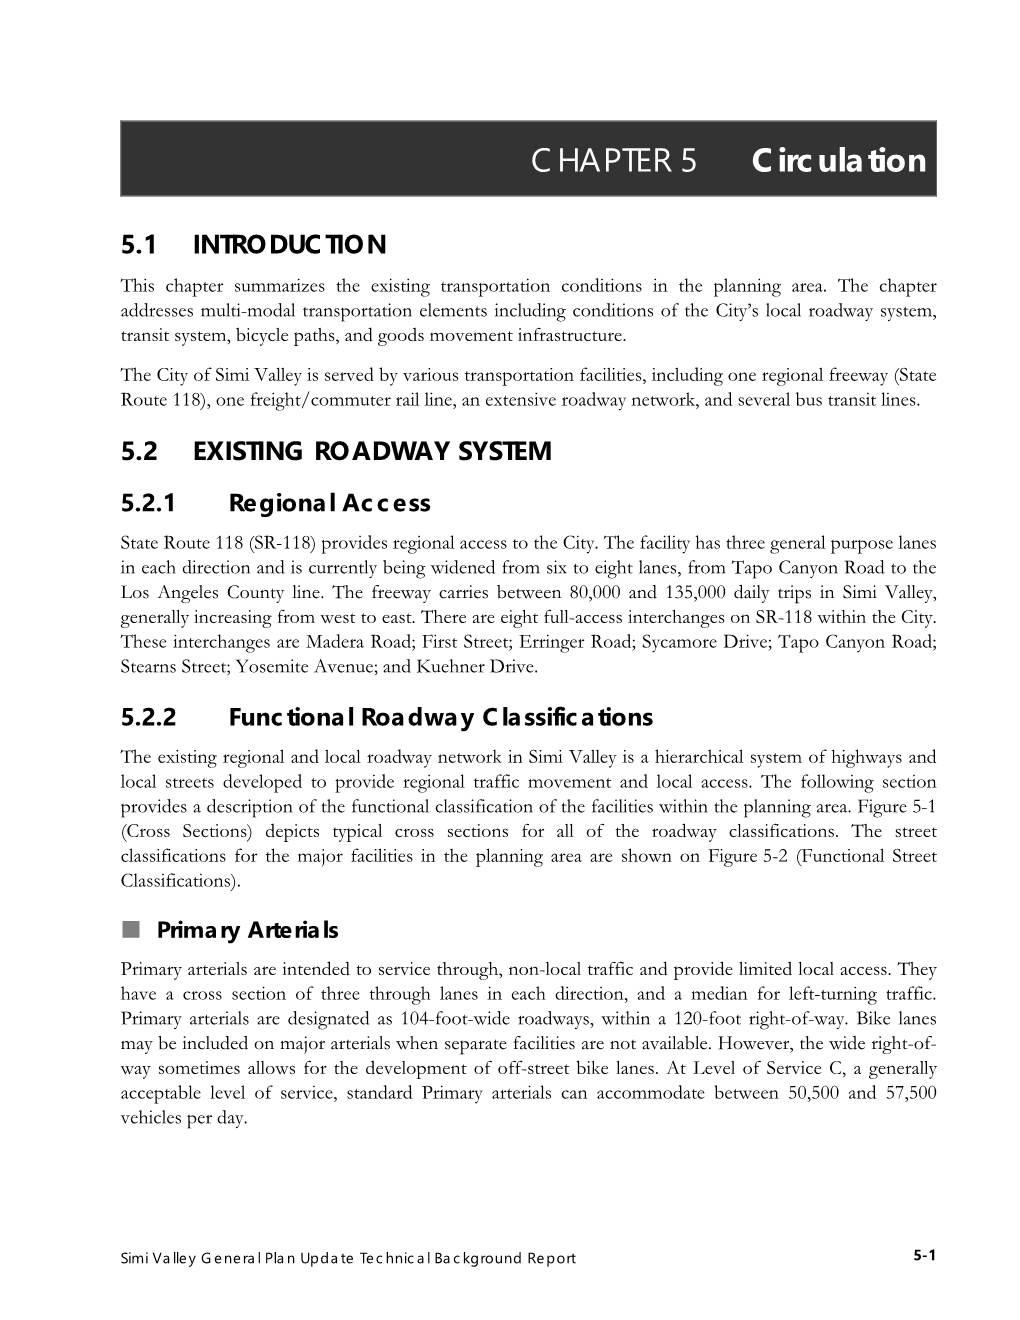 Simi Valley General Plan Update Technical Background Report 5-1 Chapter 5 Circulation